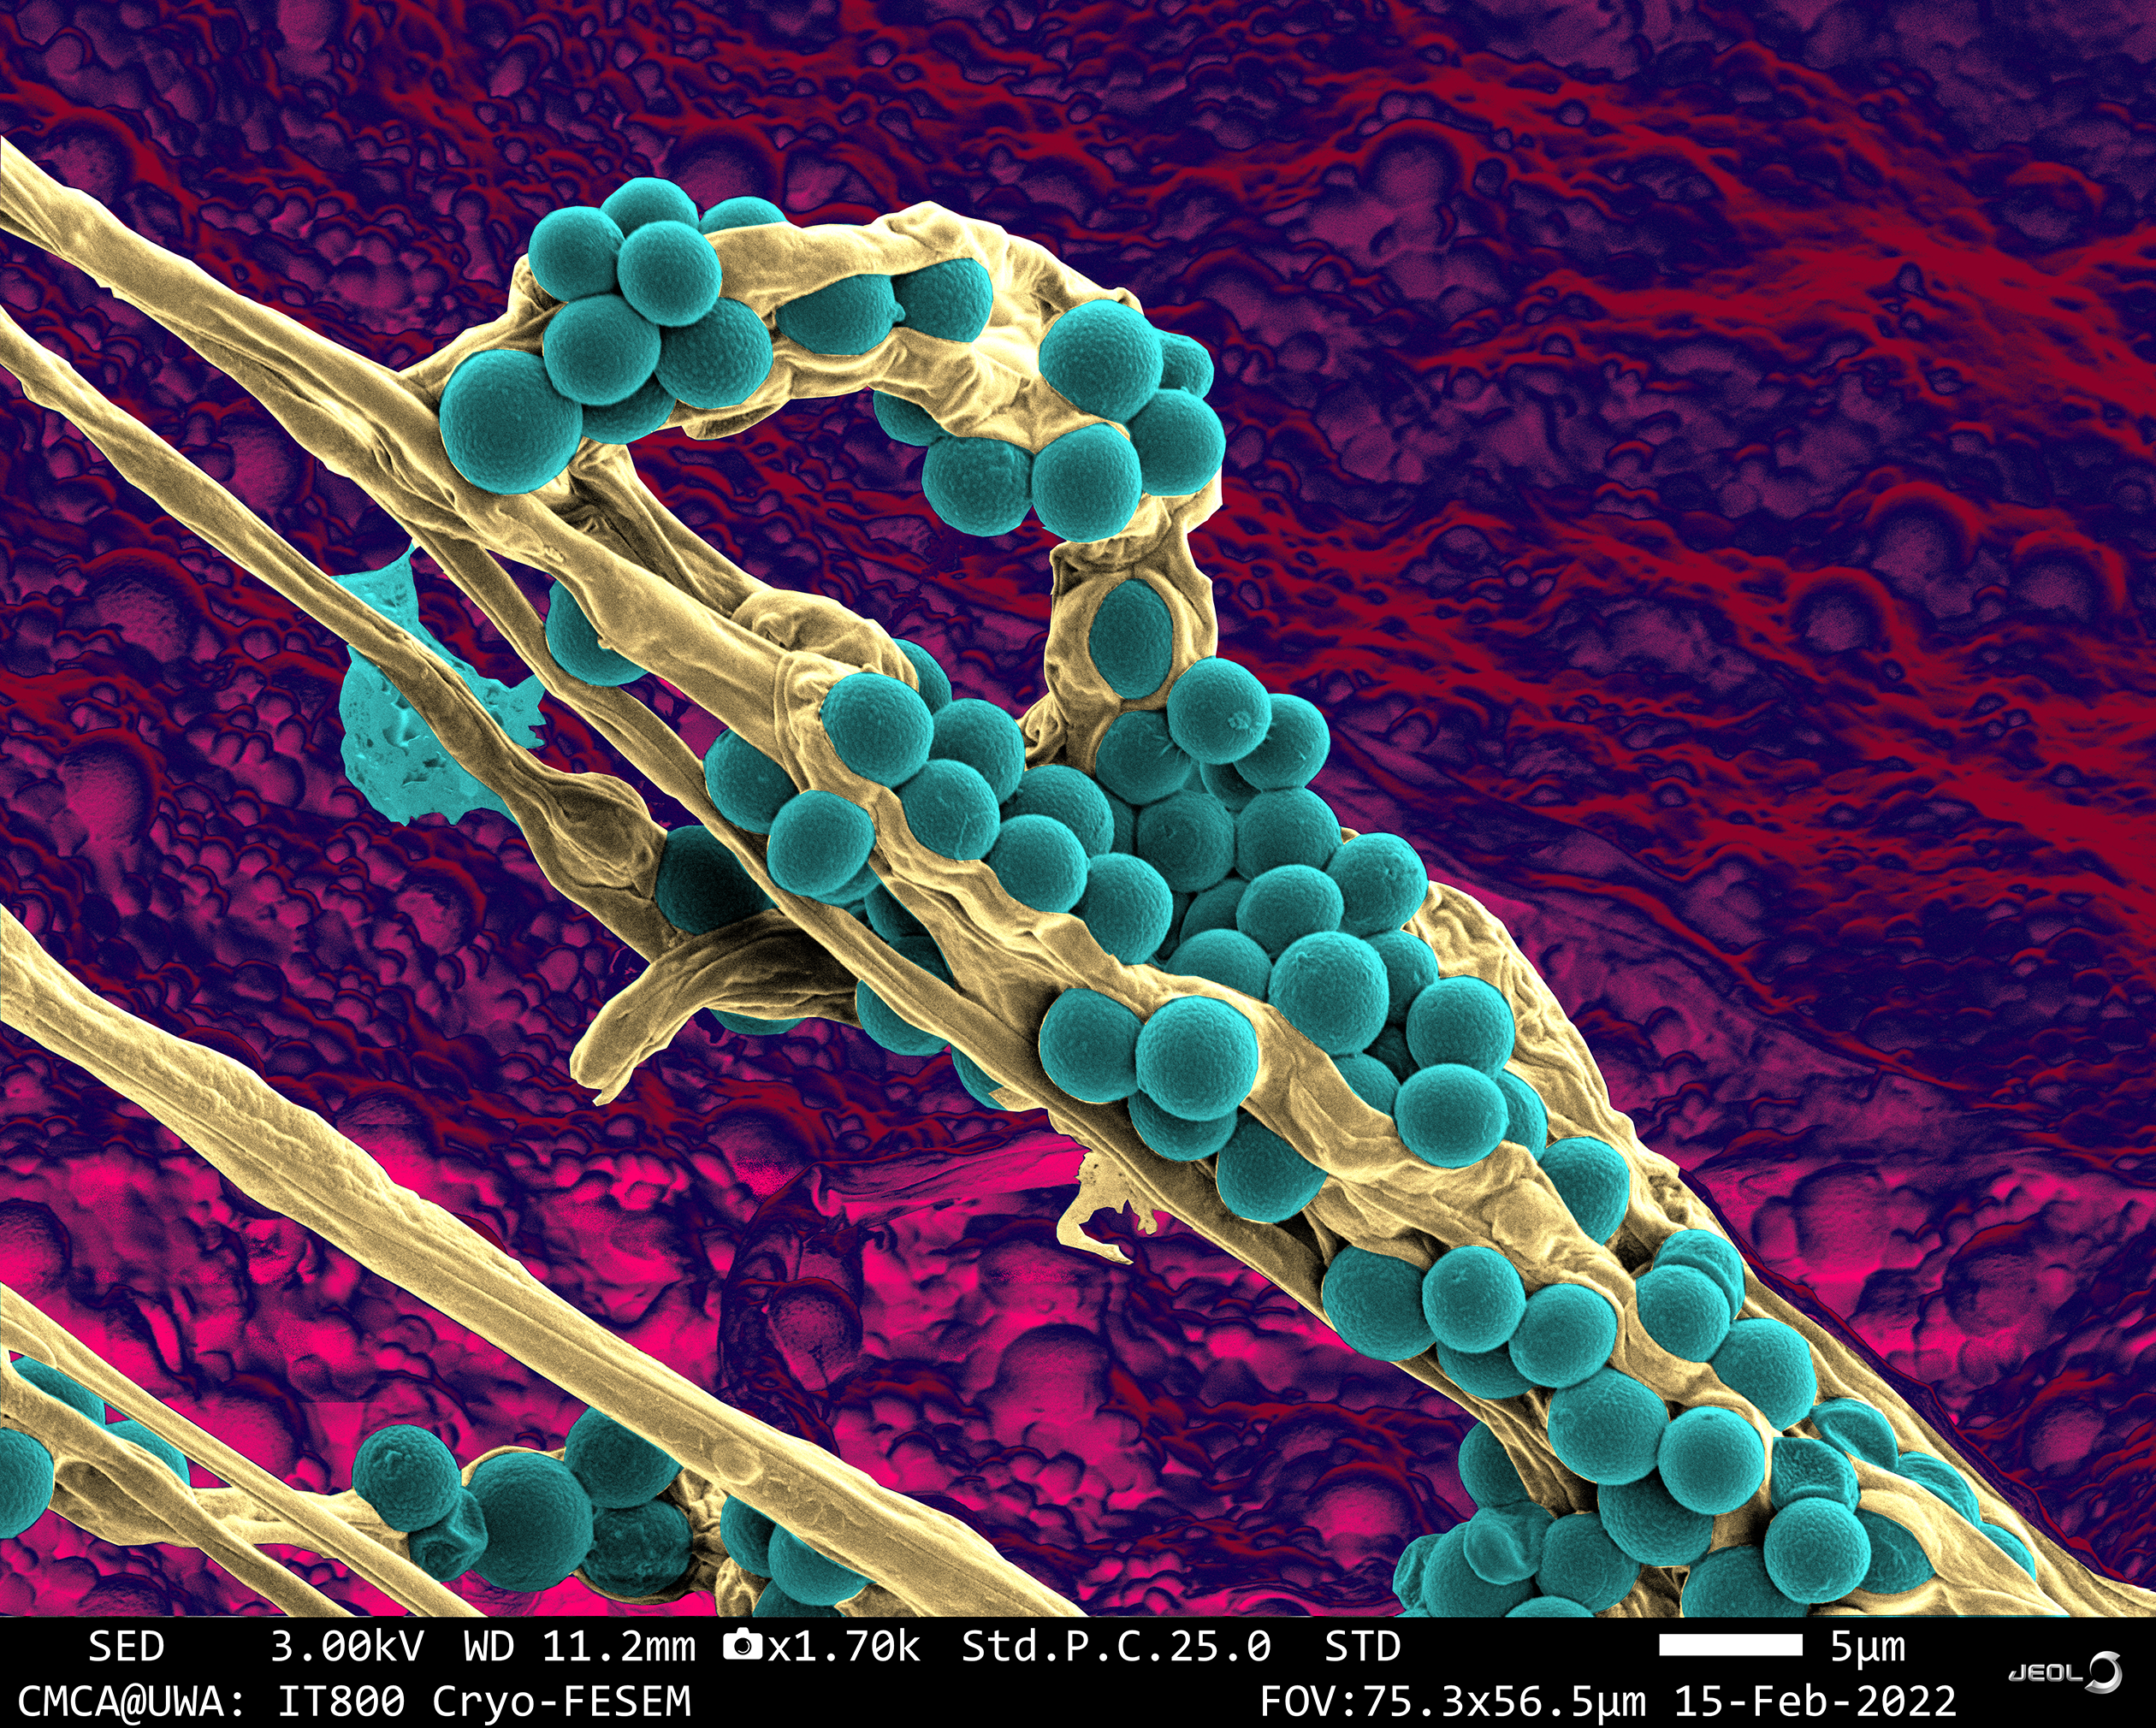 SUBJECT: Surface image of blue cheese highlighting the penicillium spp typical of these cheeses; CREDIT: Dr Jeremy Shaw and Dr Crystal Cooper, The University of Western Australia; METHOD/INSTRUMENT: JEOL IT800 Cryo-FESEM / Leica VCT500 cryo-system